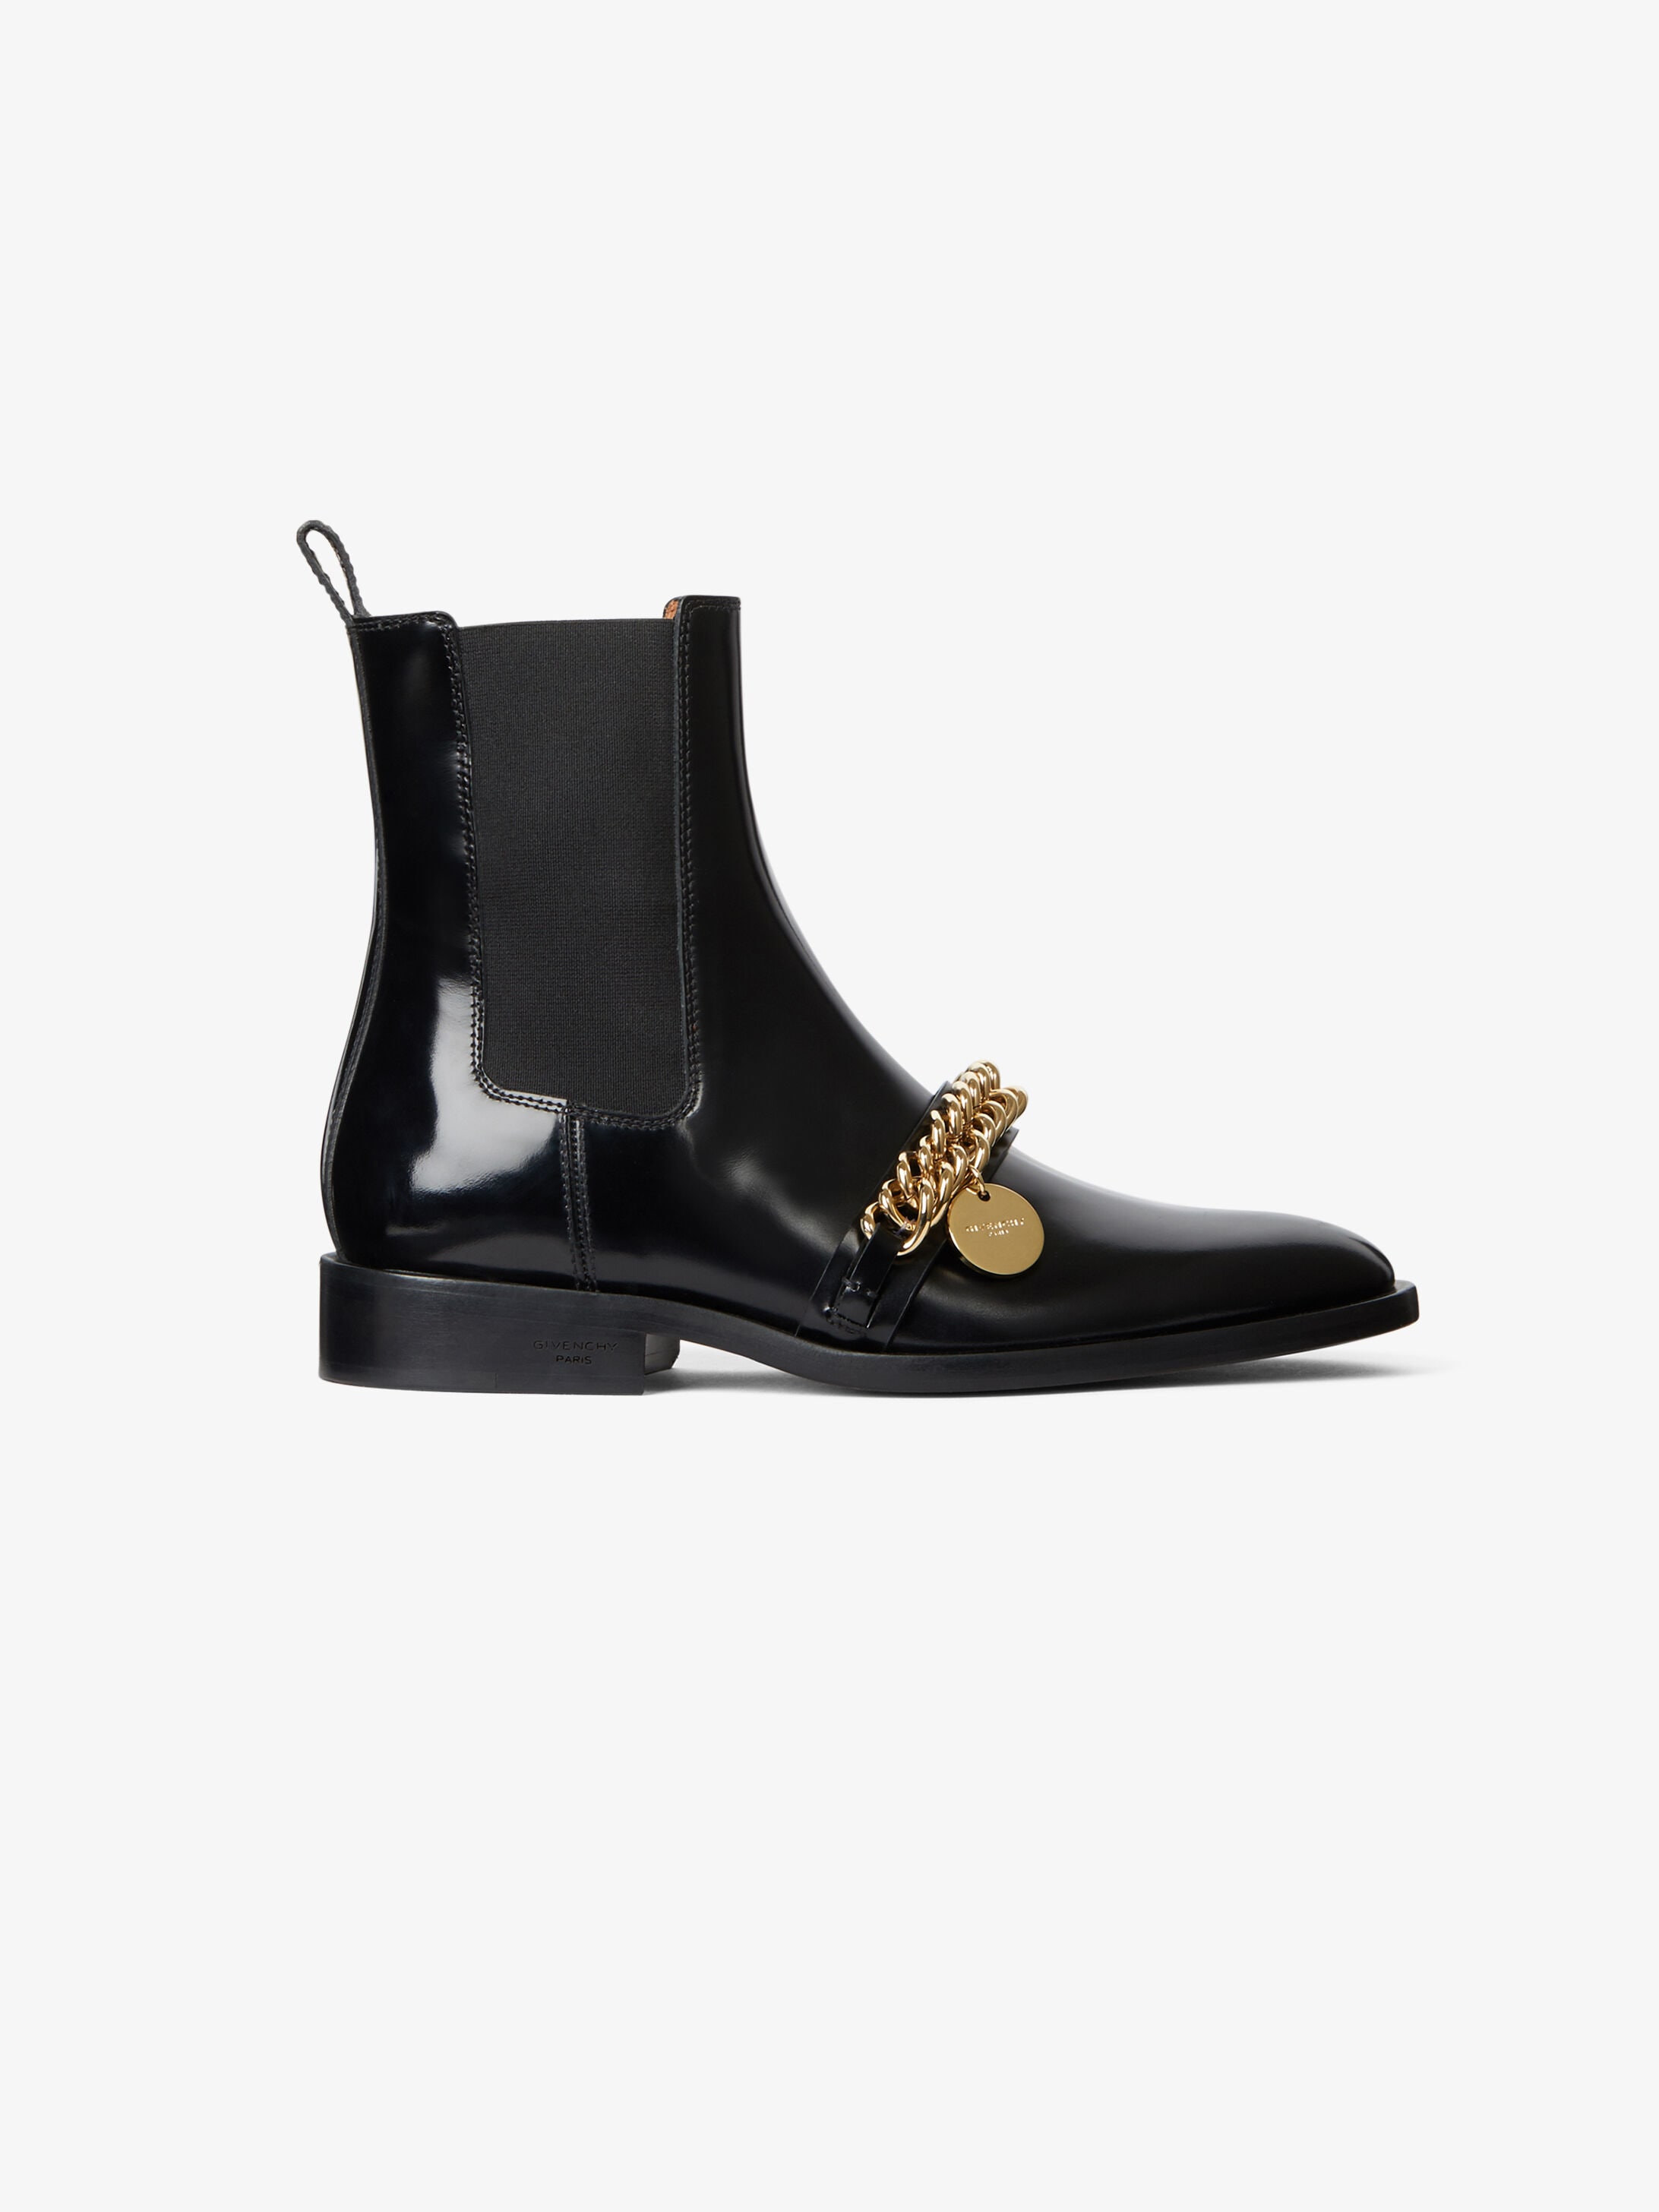 Women's Boots collection by Givenchy 